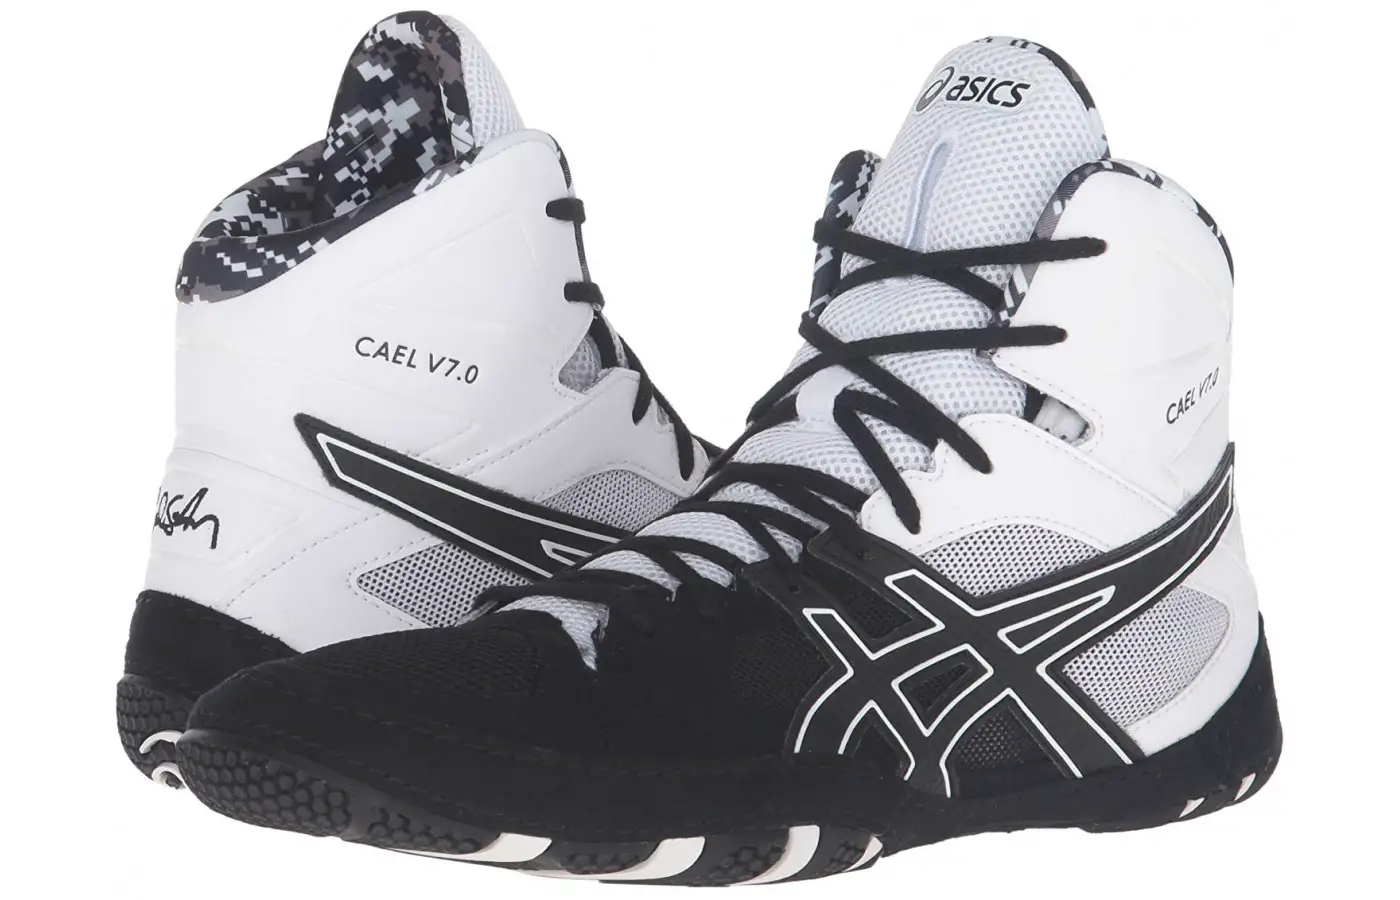 Asics Cael v7.0 Reviewed in 2020 